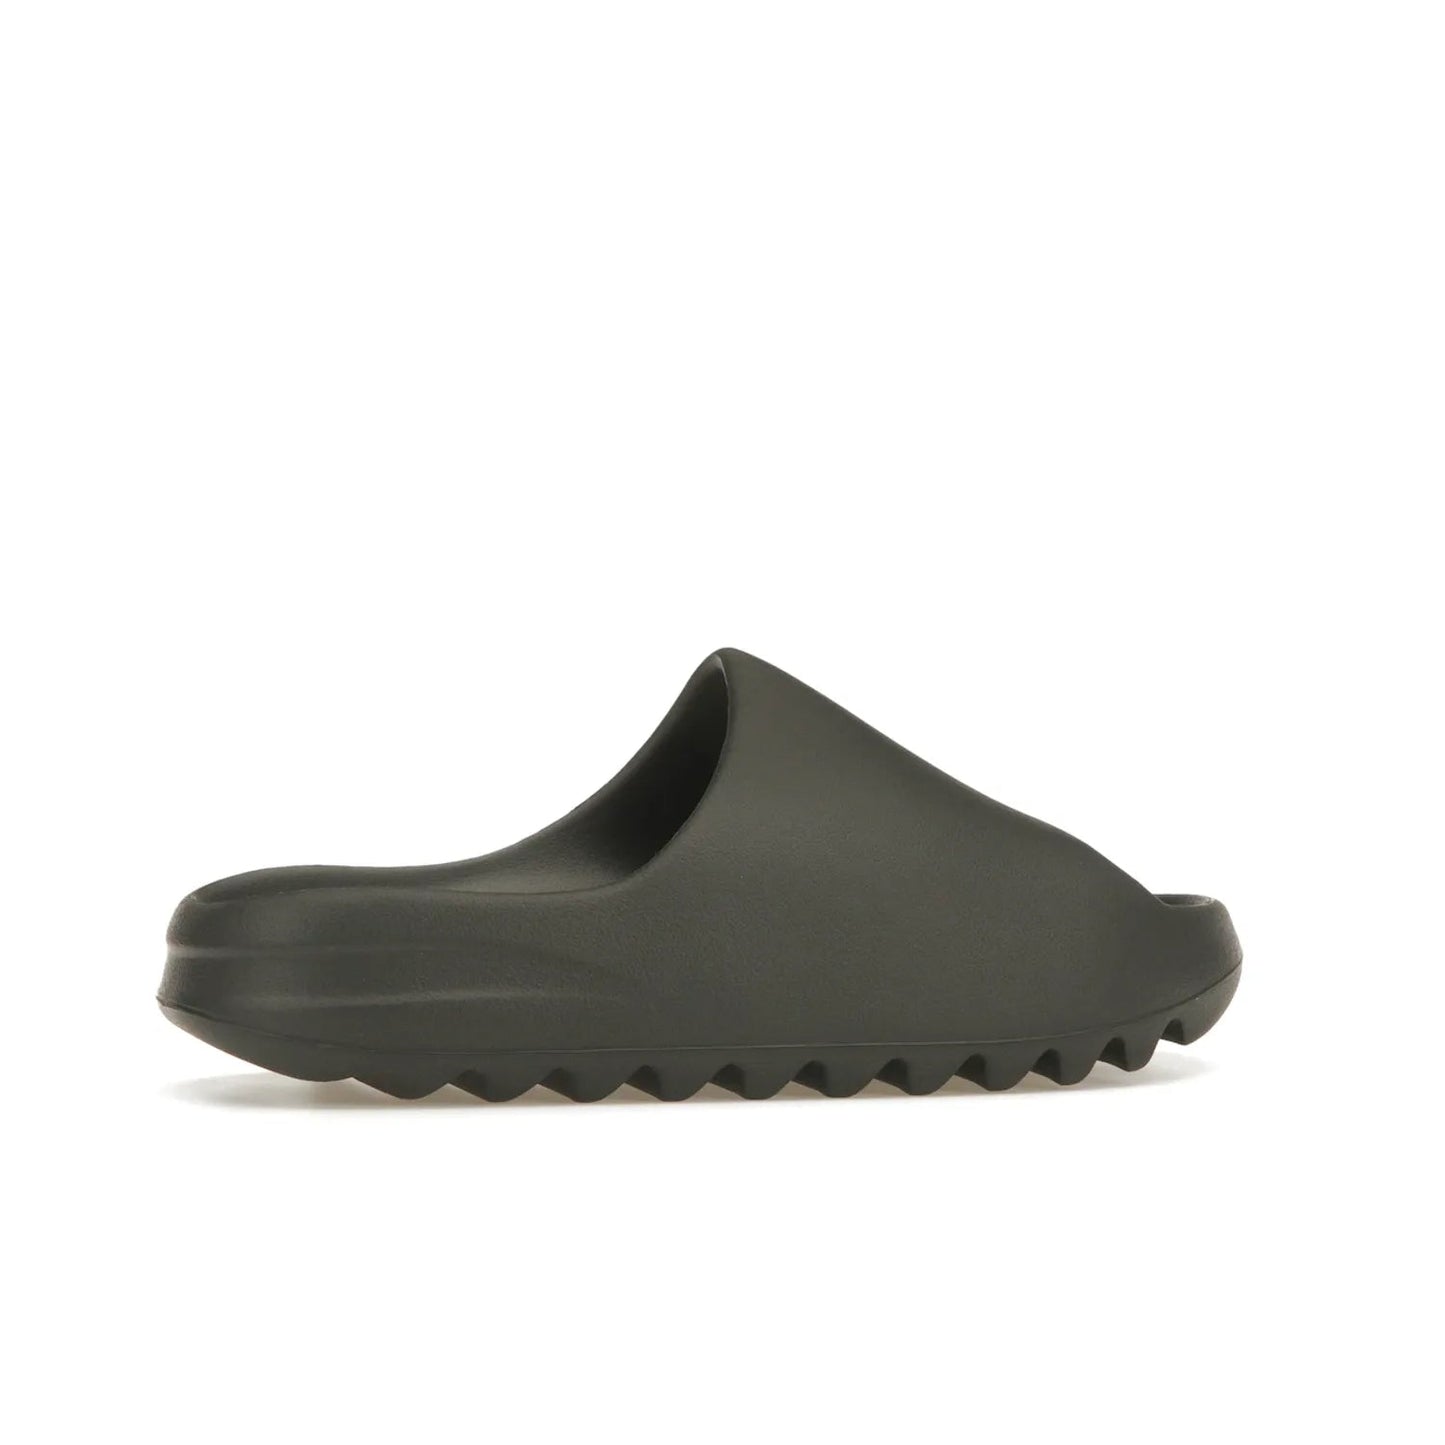 adidas Yeezy Slide Granite - Image 35 - Only at www.BallersClubKickz.com - Introducing the adidas Yeezy Slide Granite with a sleek, soft-to-touch one-piece upper – perfect for making a statement with its minimalistic design and luxurious comfort. Get yours now for only $70.